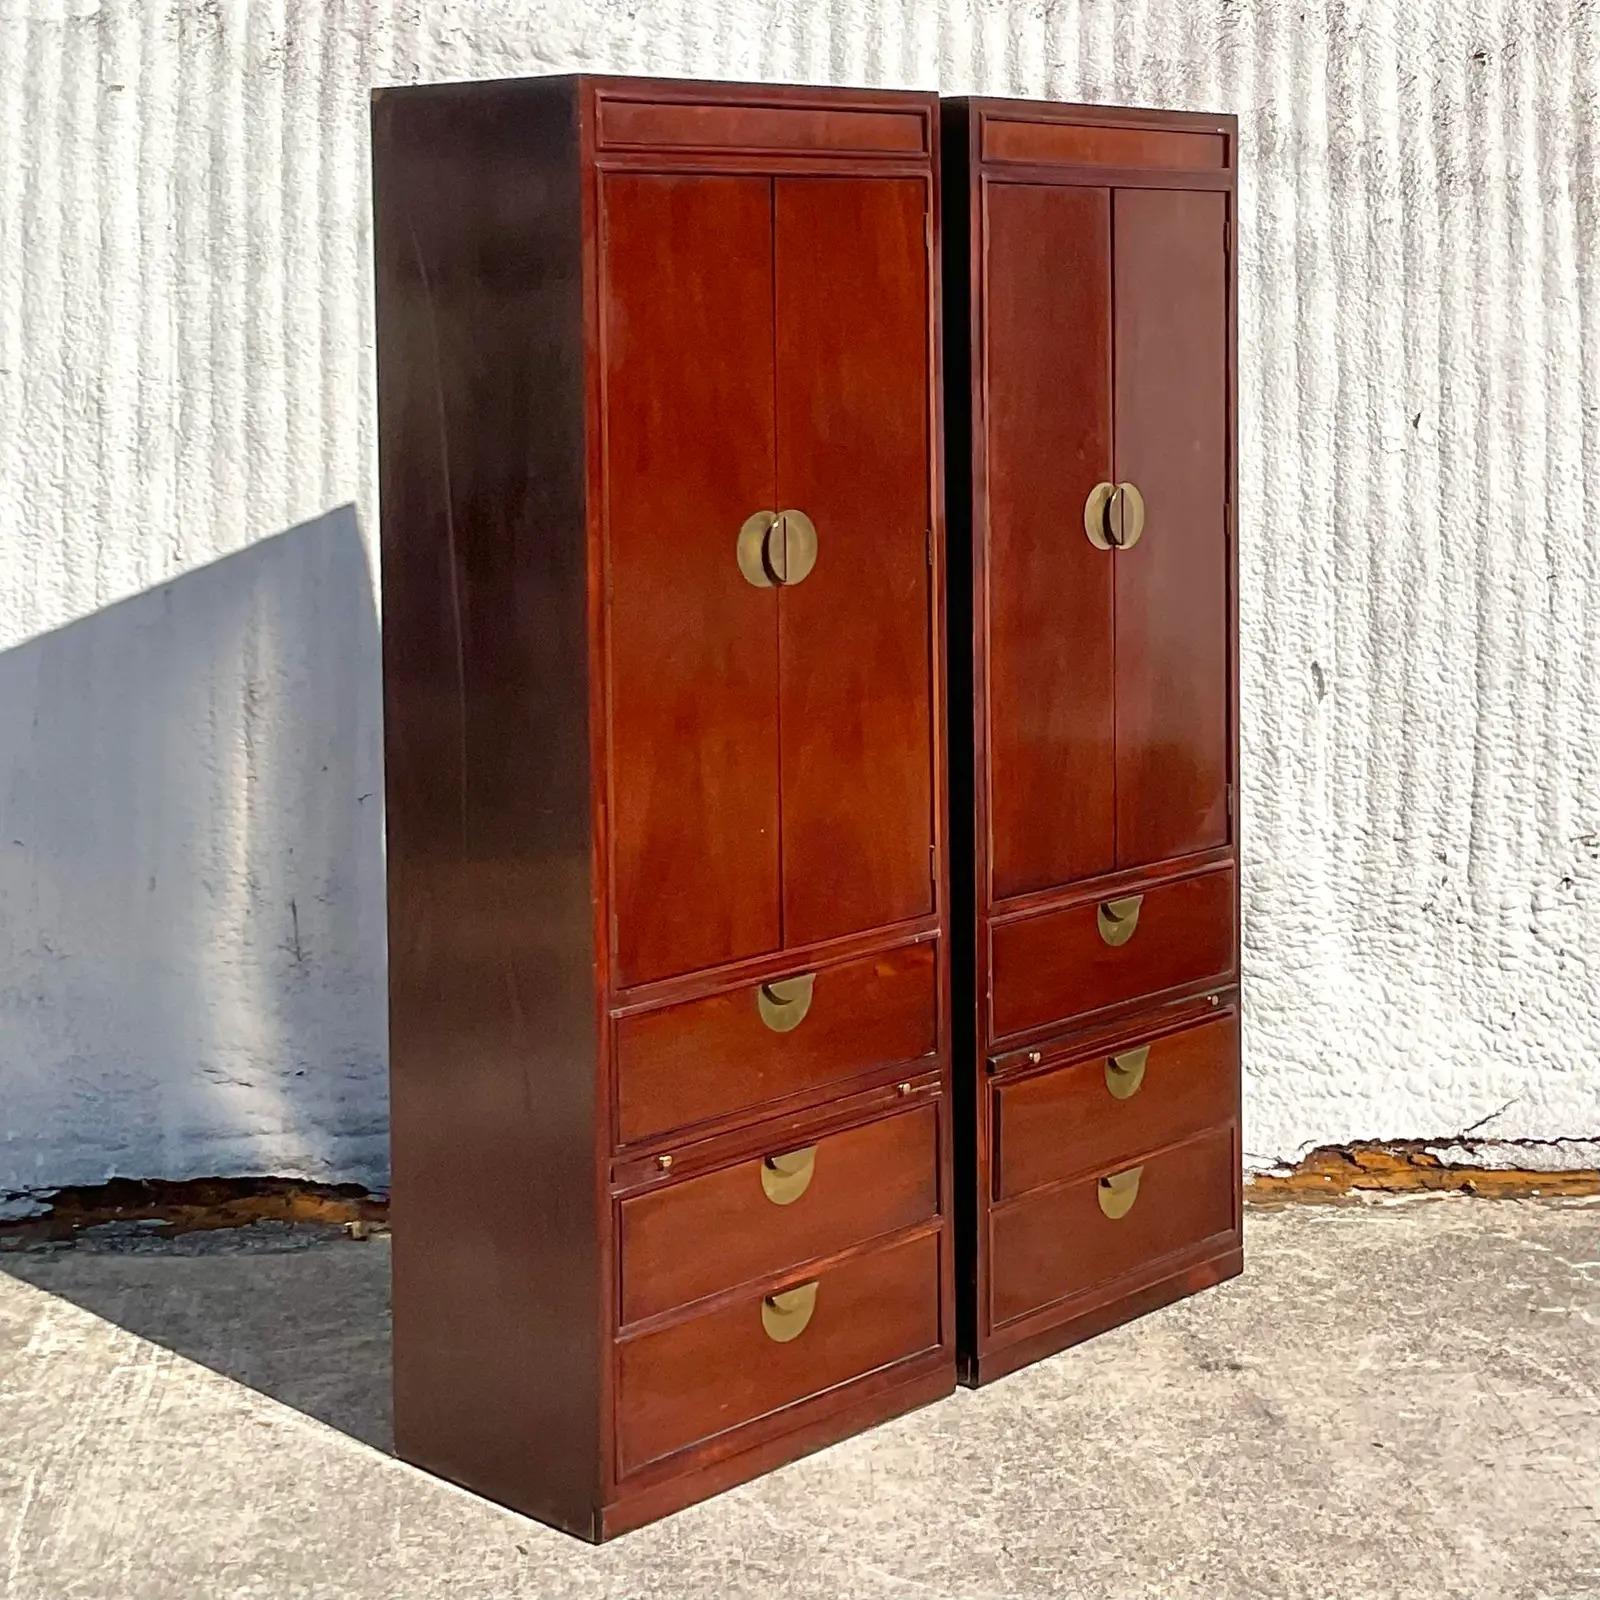 A fabulous pair of vintage Ming armoires. Made by the iconic Thomasville group. Rich wood with bright brass Ming medallion hardware. Pull out table top makes these cabinets super useful. Perfect as armoire or even chic nightstands. You decide!